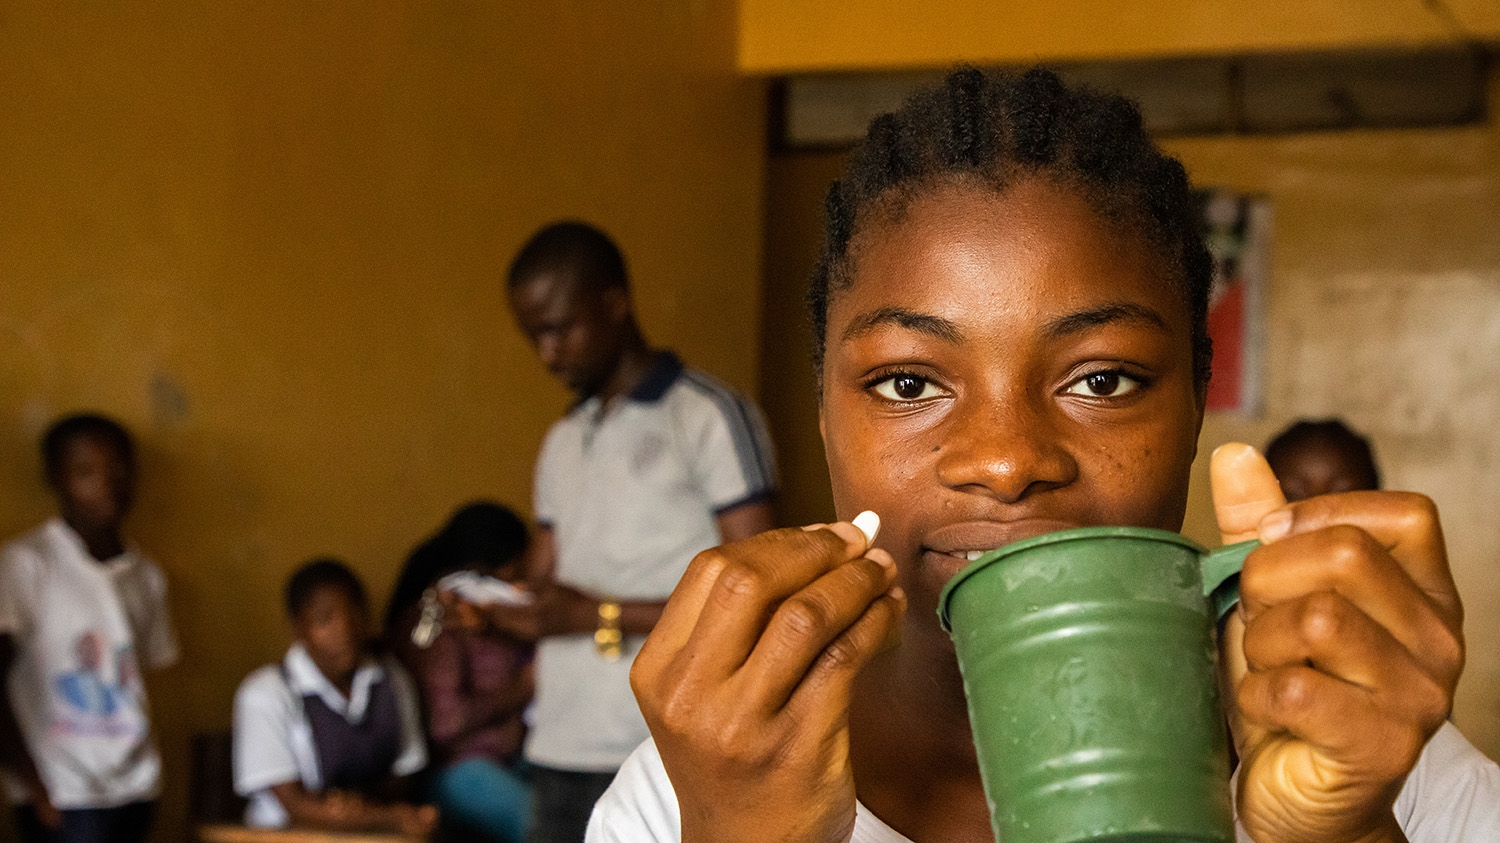 A school girl holds a cup of water in one hand and some medication in the other hand at a mass drug treatment session in Liberia.